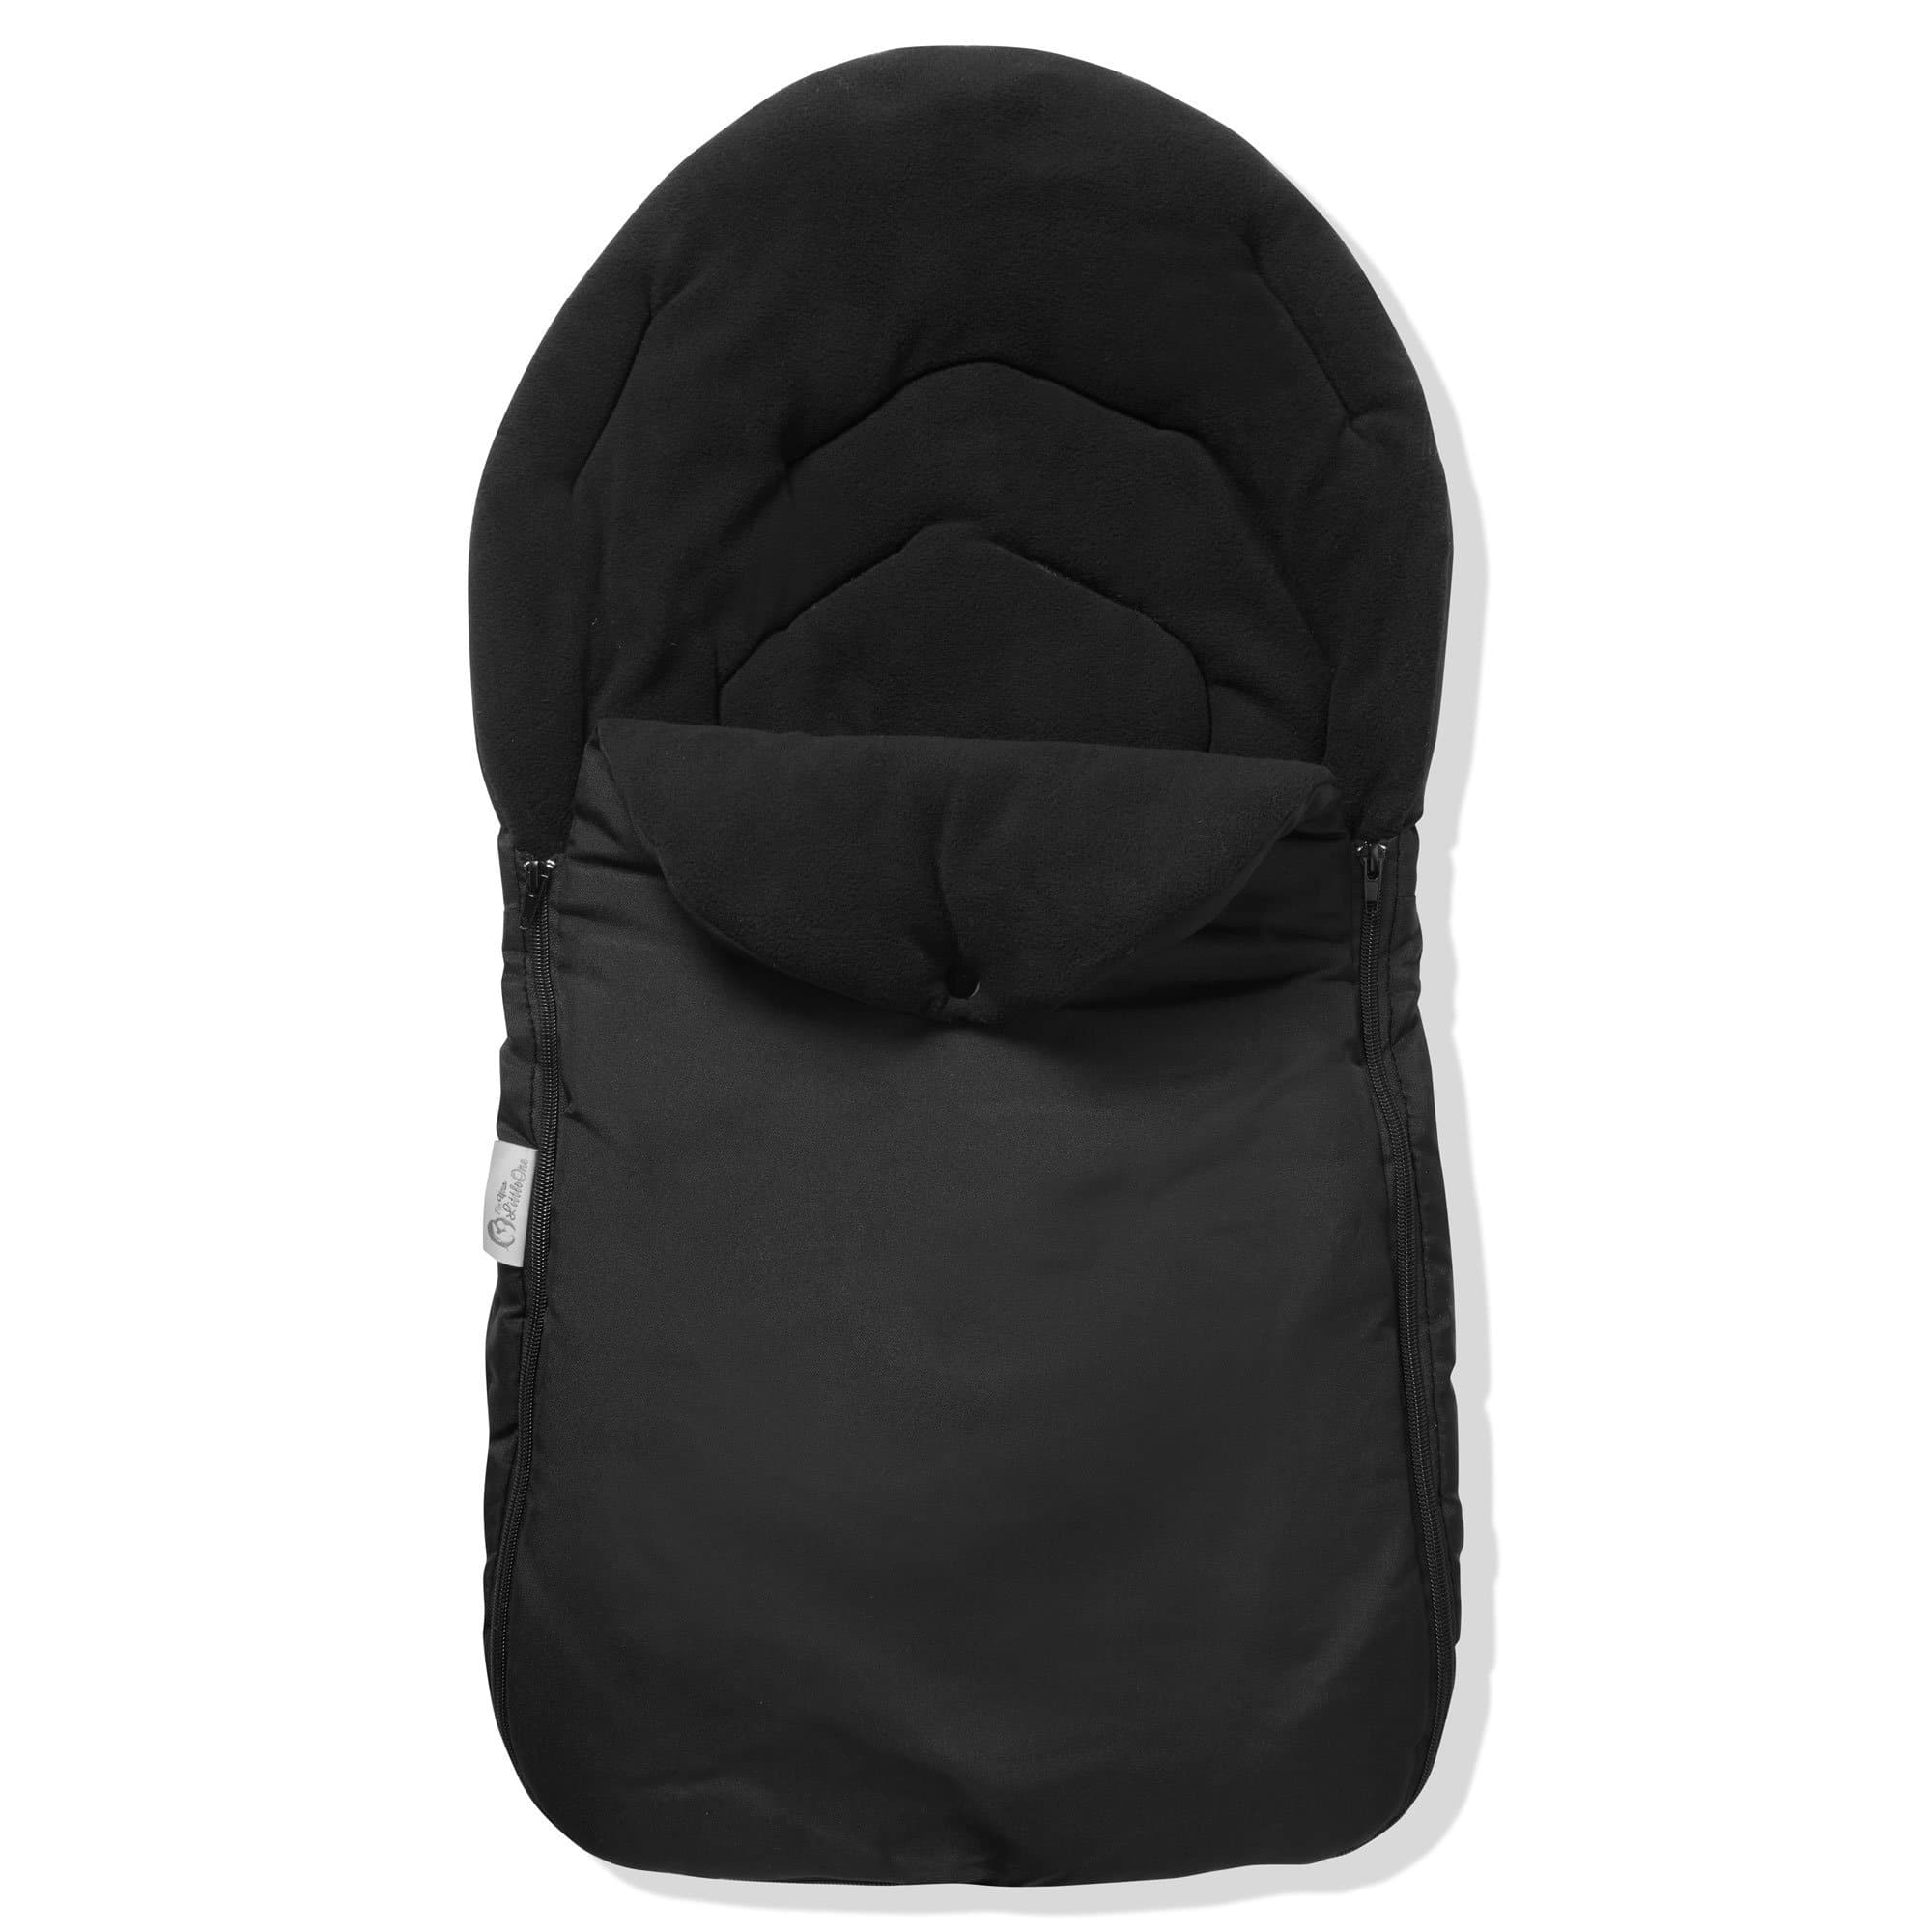 Car Seat Footmuff / Cosy Toes Compatible with Nuna - Black / Fits All Models | For Your Little One